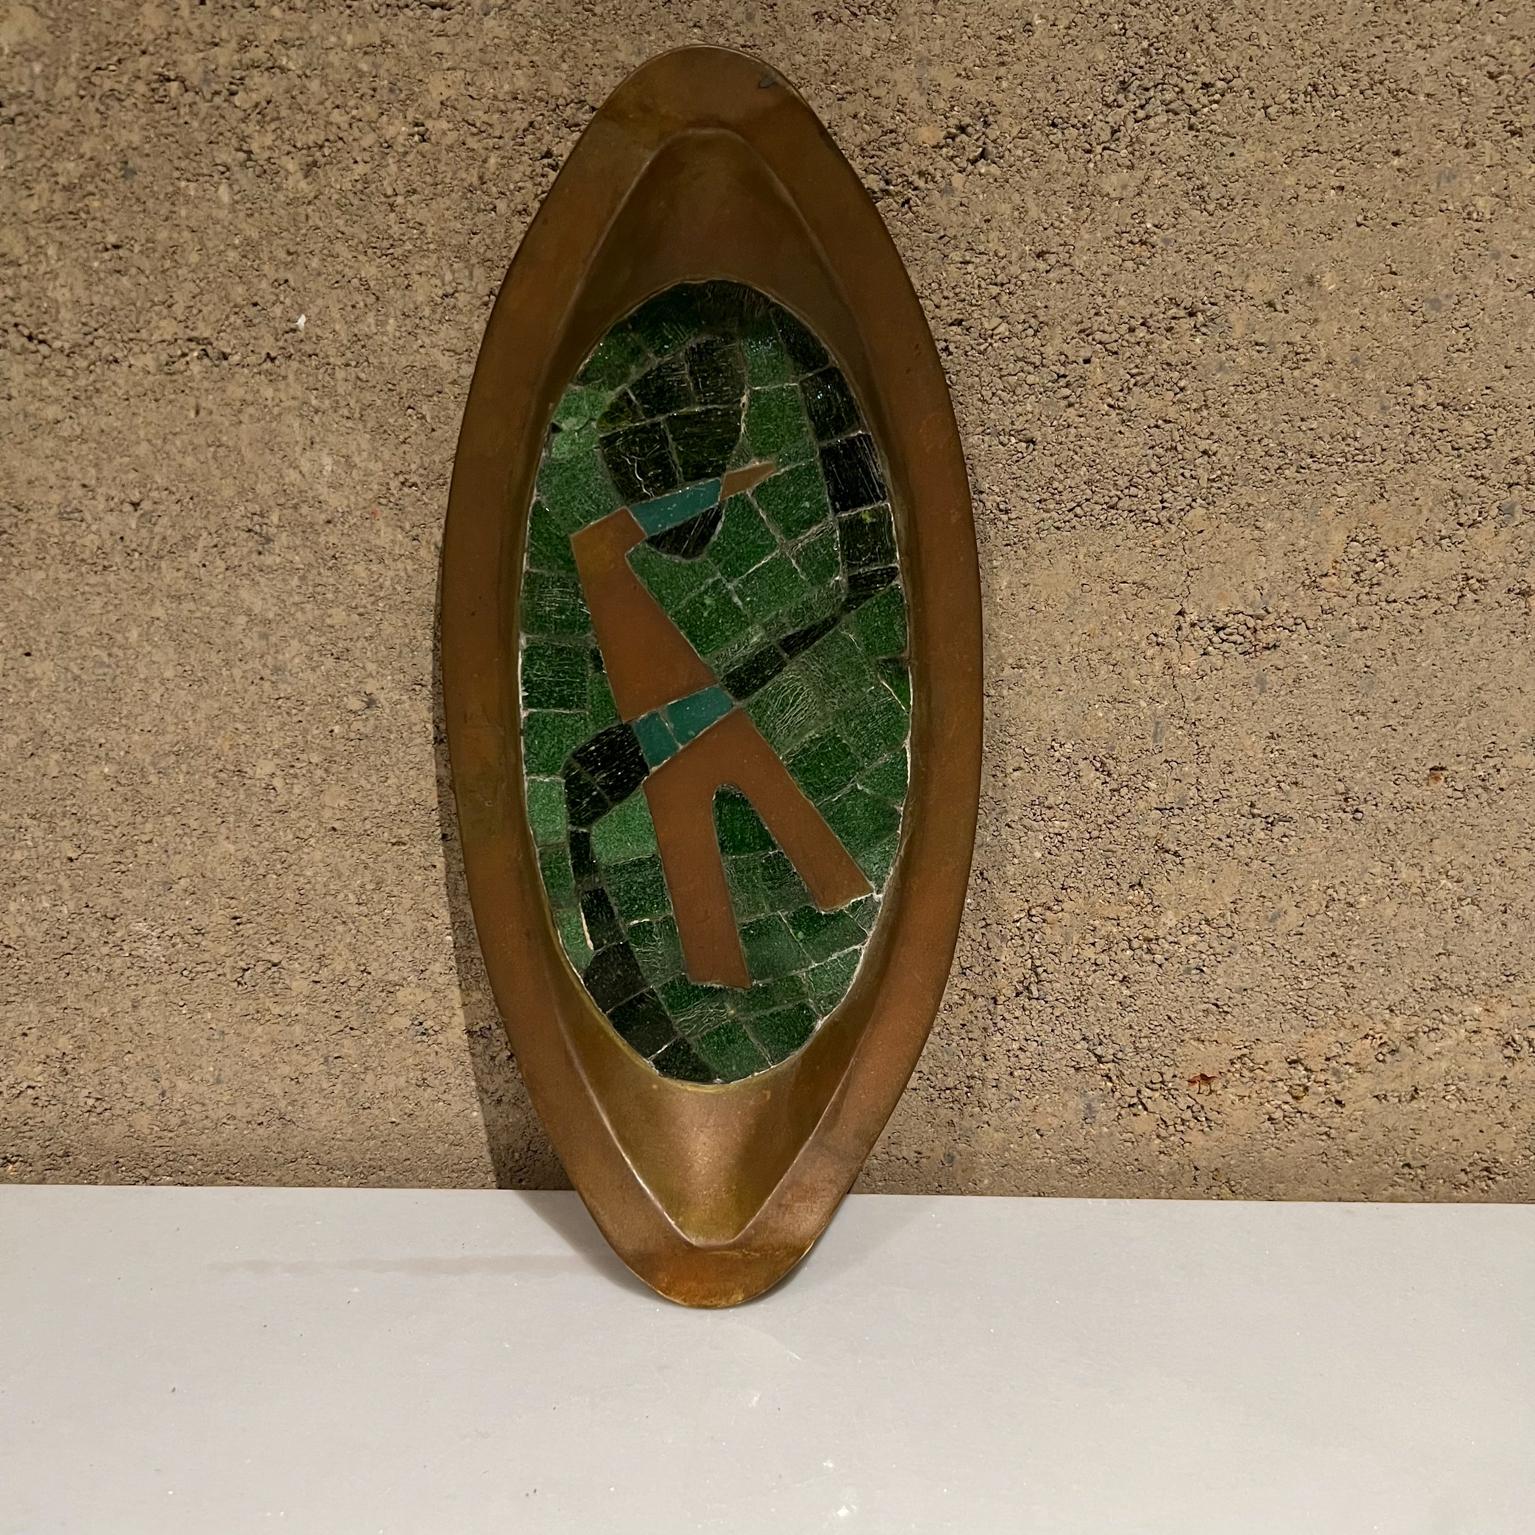 Mexican wall art by Salvador Teran
Brass and green stone mosaic decorative dish - 
Handwrought wall art plaque by Salvador Teran, Mexico 1960s.
Maker stamp present.
1.75 tall x 12.5 wide x 5.75 deep
Preowned original unrestored vintage